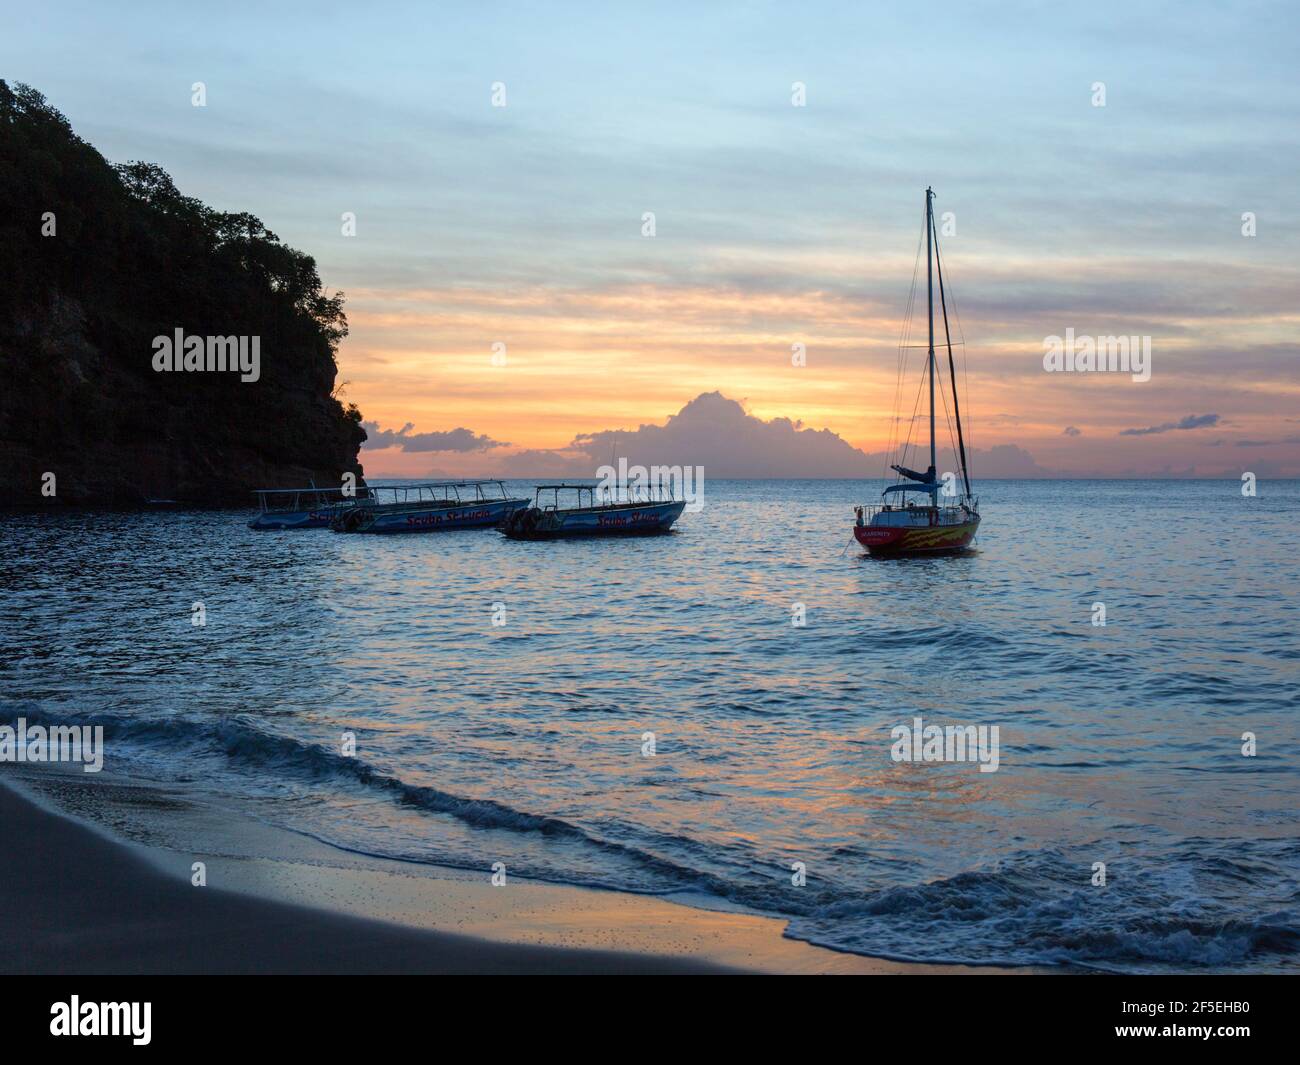 Soufriere, St Lucia. View from beach across the Caribbean Sea at sunset, boats anchored offshore, Anse Chastanet. Stock Photo